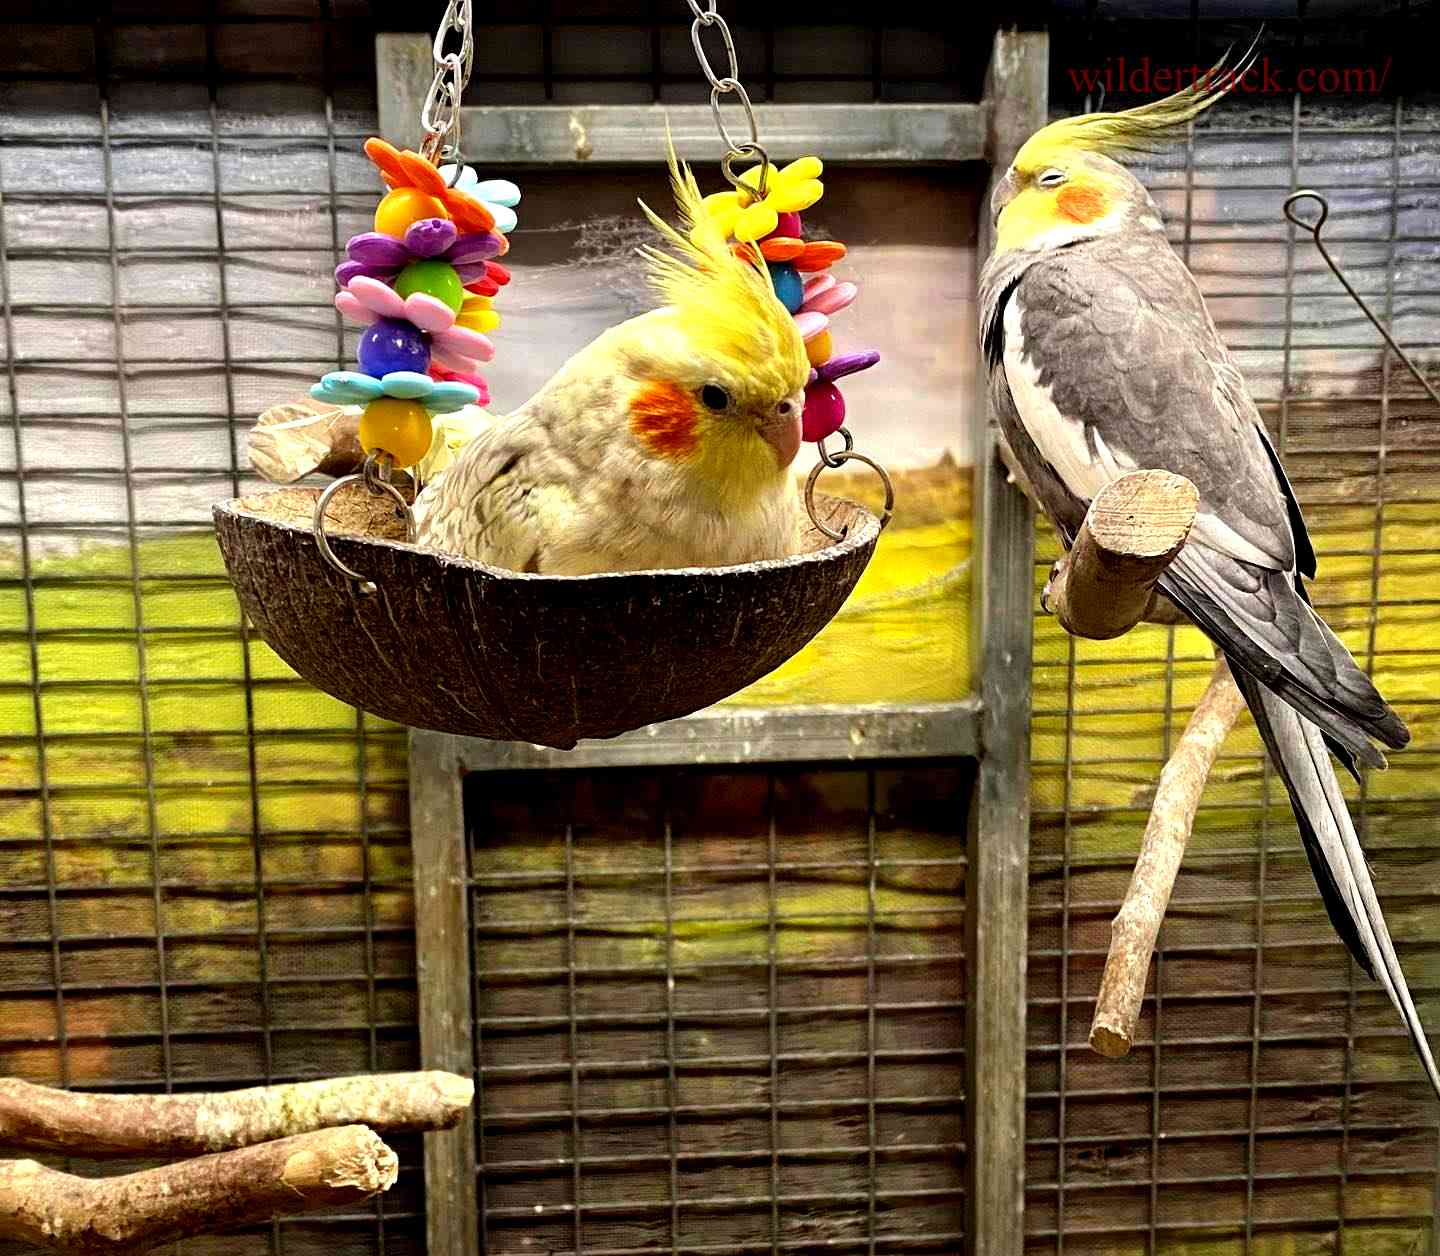 Where to Buy Male Cockatiel?